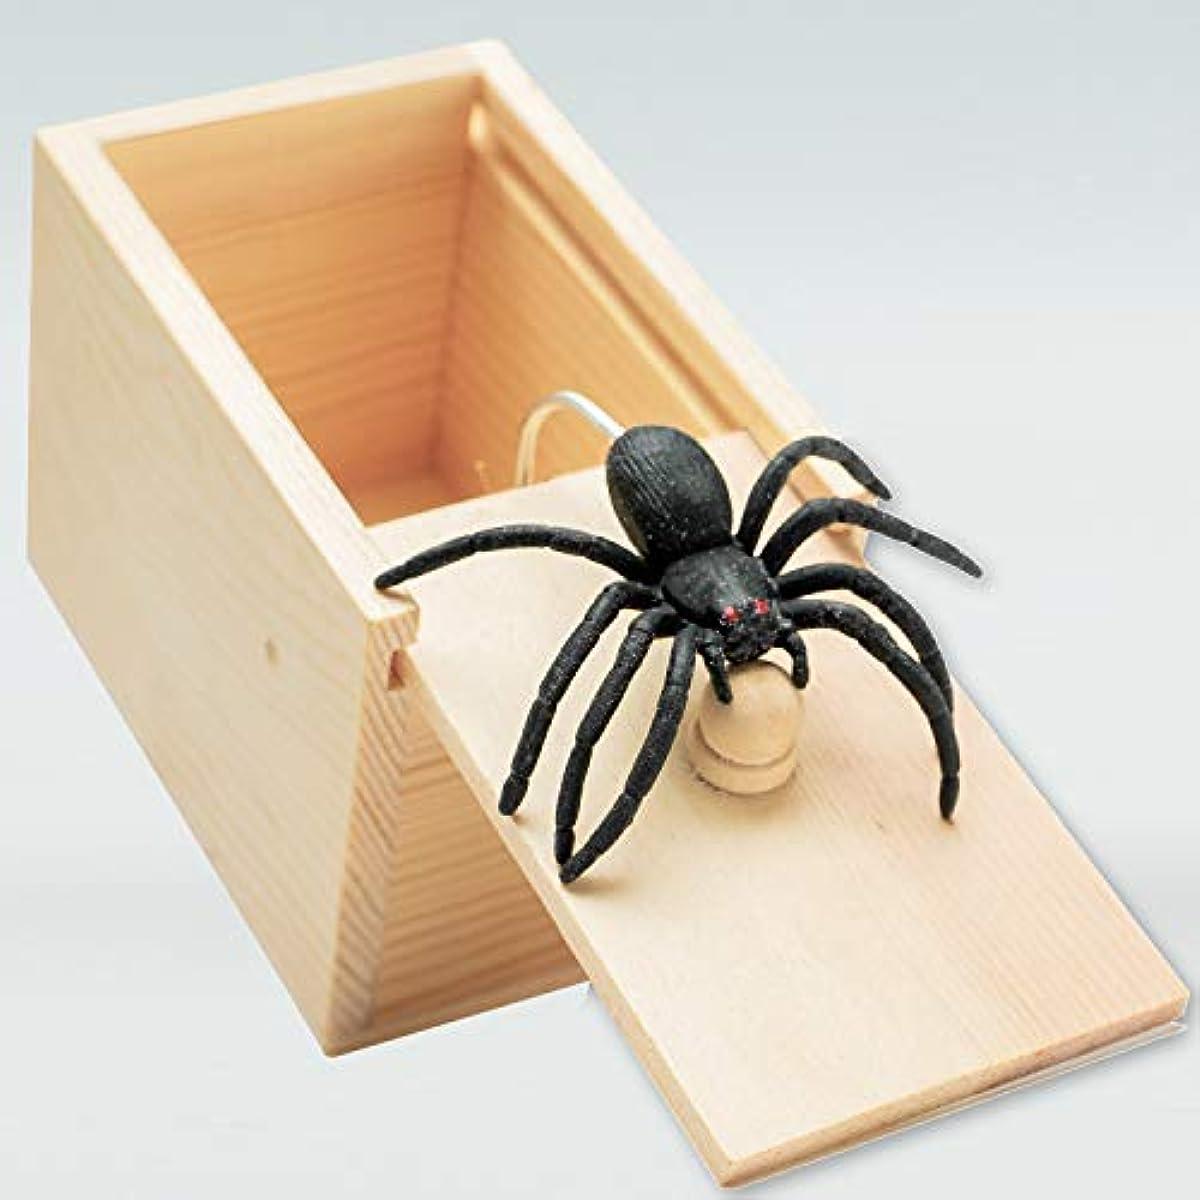 Handcrafted Solid Wood Spider In Box Prank,Rubber Spider Prank Box